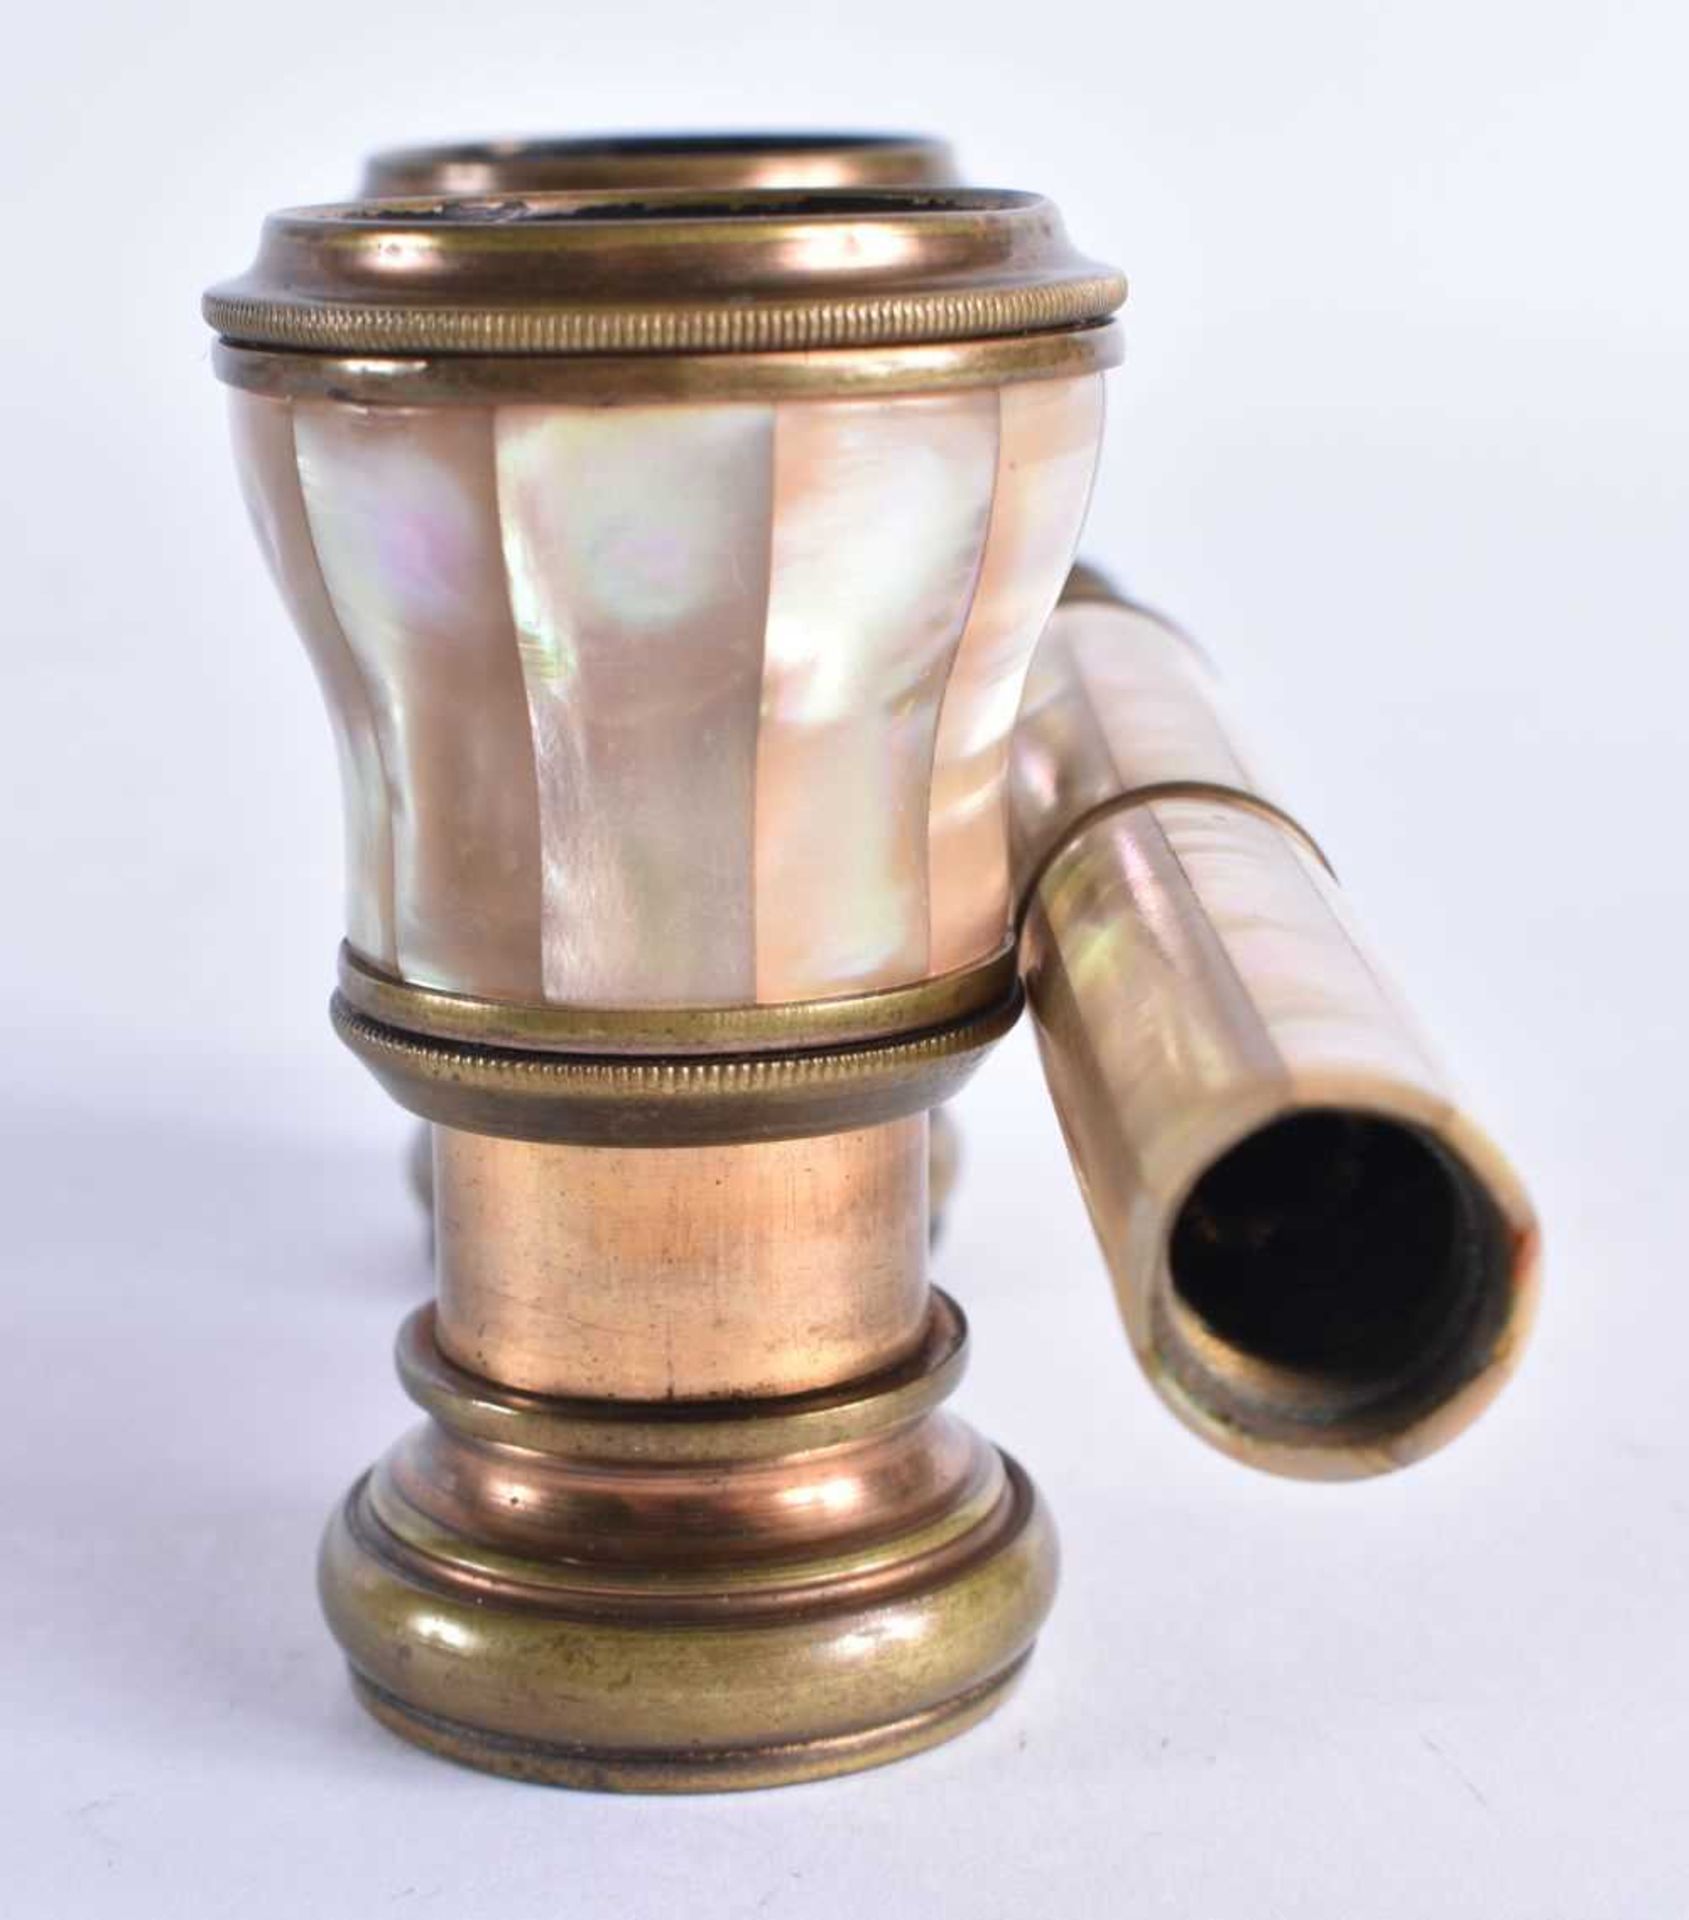 A PAIR OF MOTHER OF PEARL OPERA GLASSES 6 x 23cm extended - Image 8 of 8